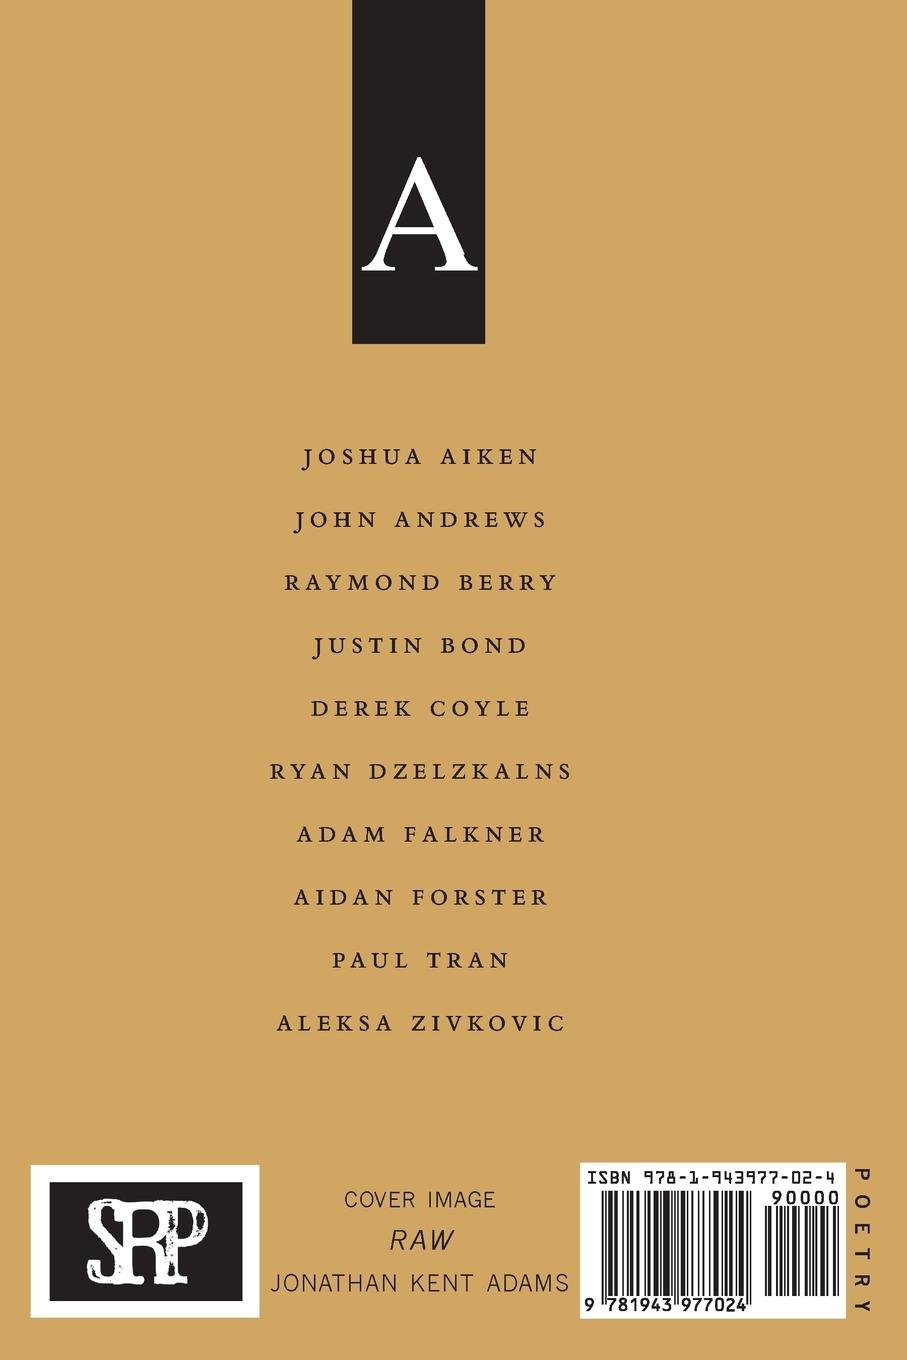 Image of Assaracus Issue 20: A Journal of Gay Poetry (Bond, Dzelzkalns, Tran)